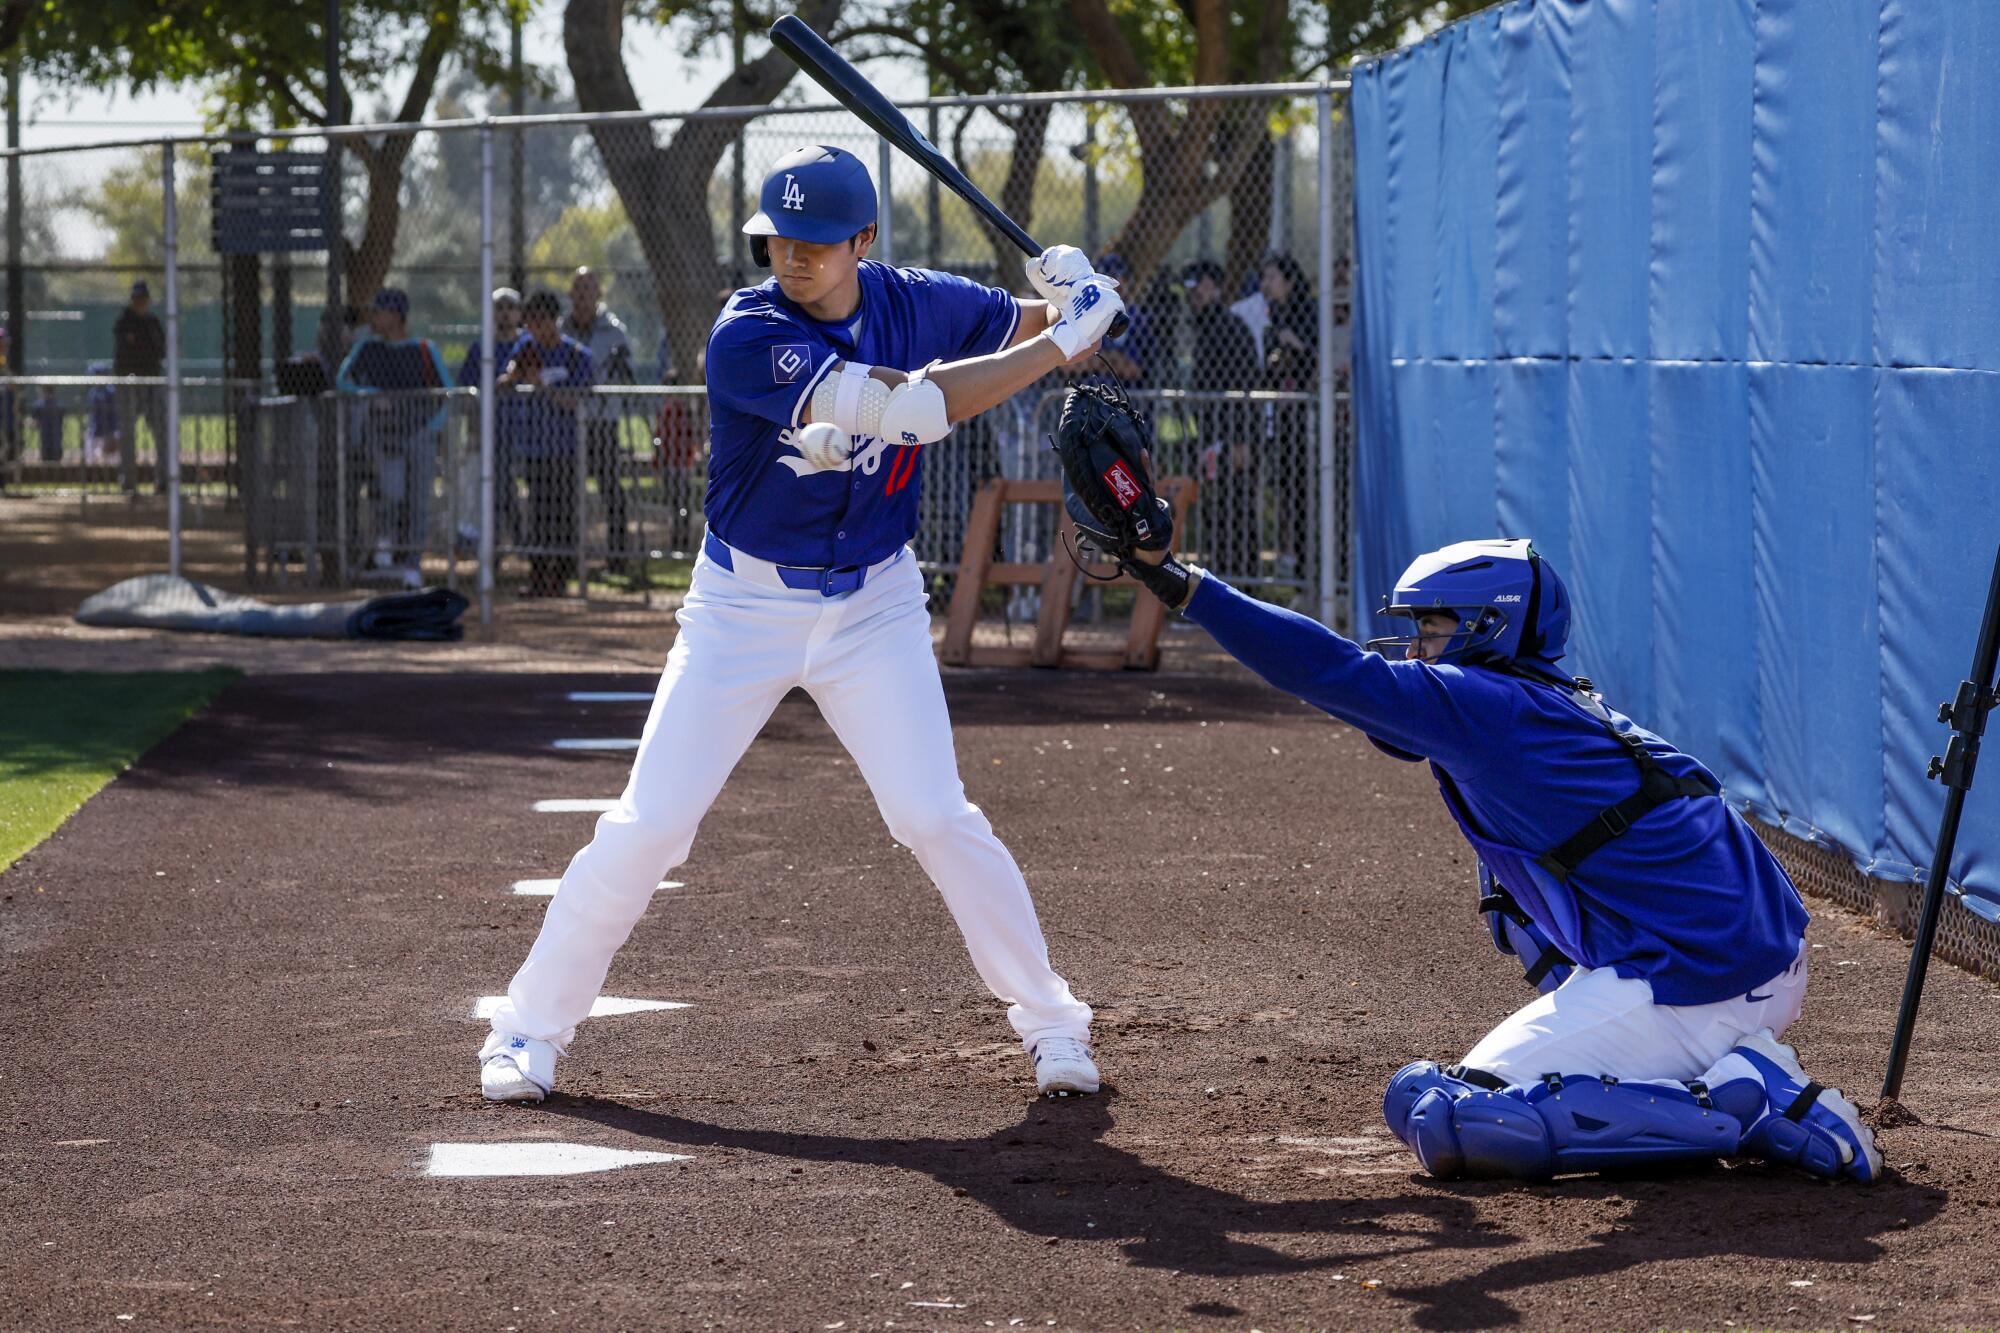 Dodgers DH Shohei Ohtani stands in the batter's box during a practice session.